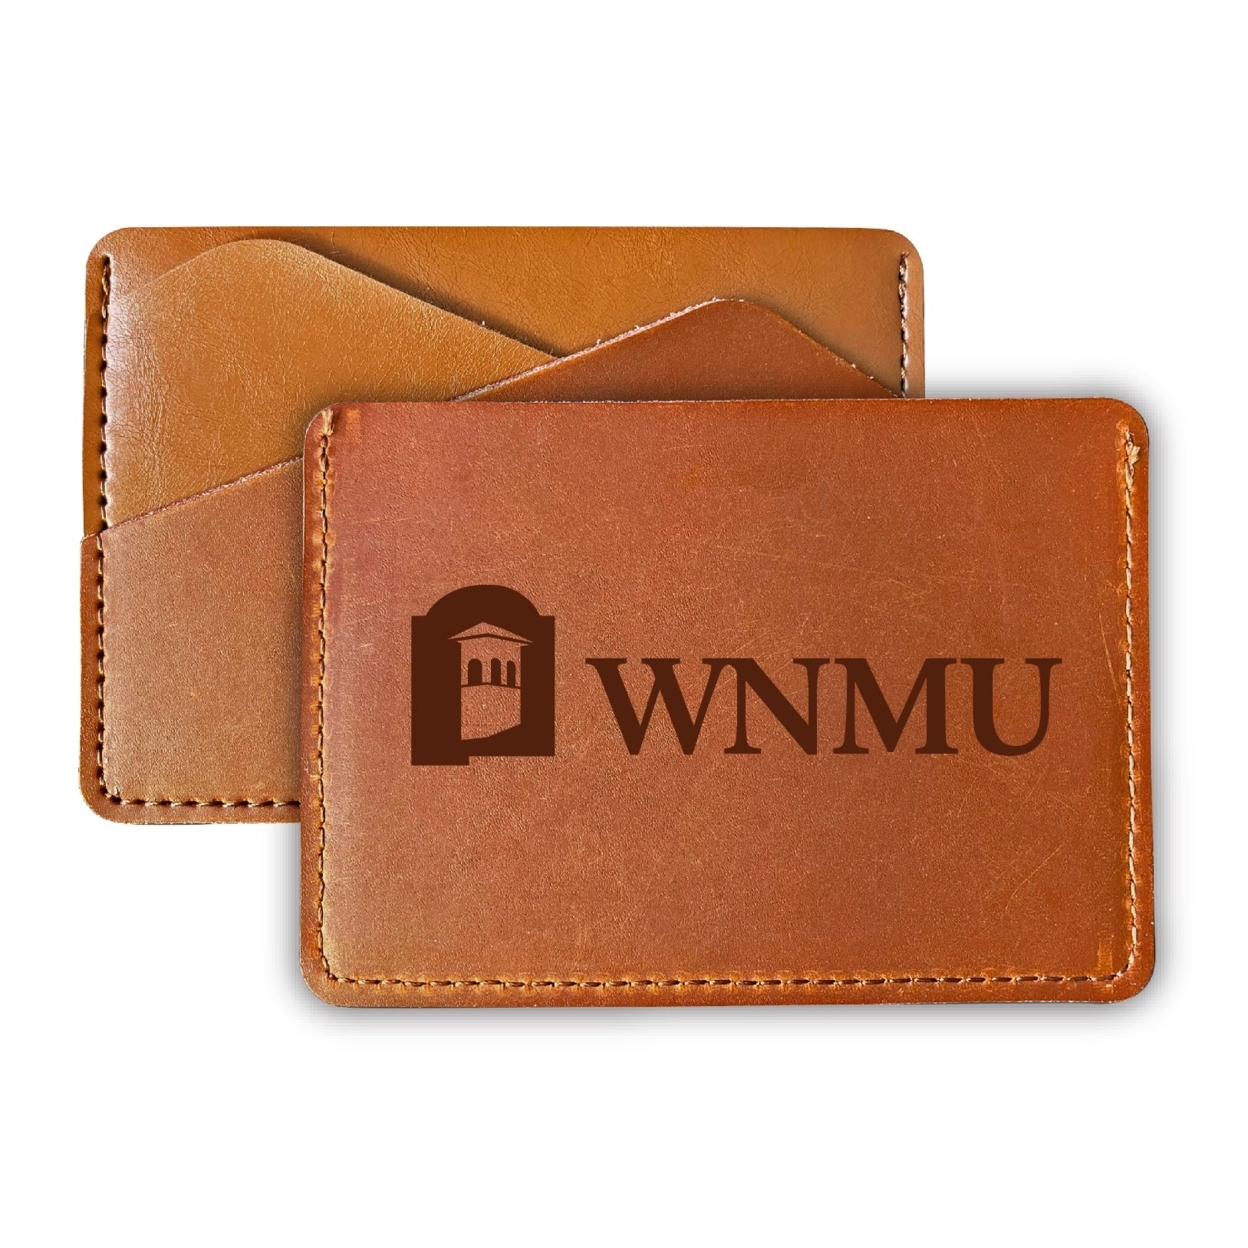 Western New Mexico University College Leather Card Holder Wallet